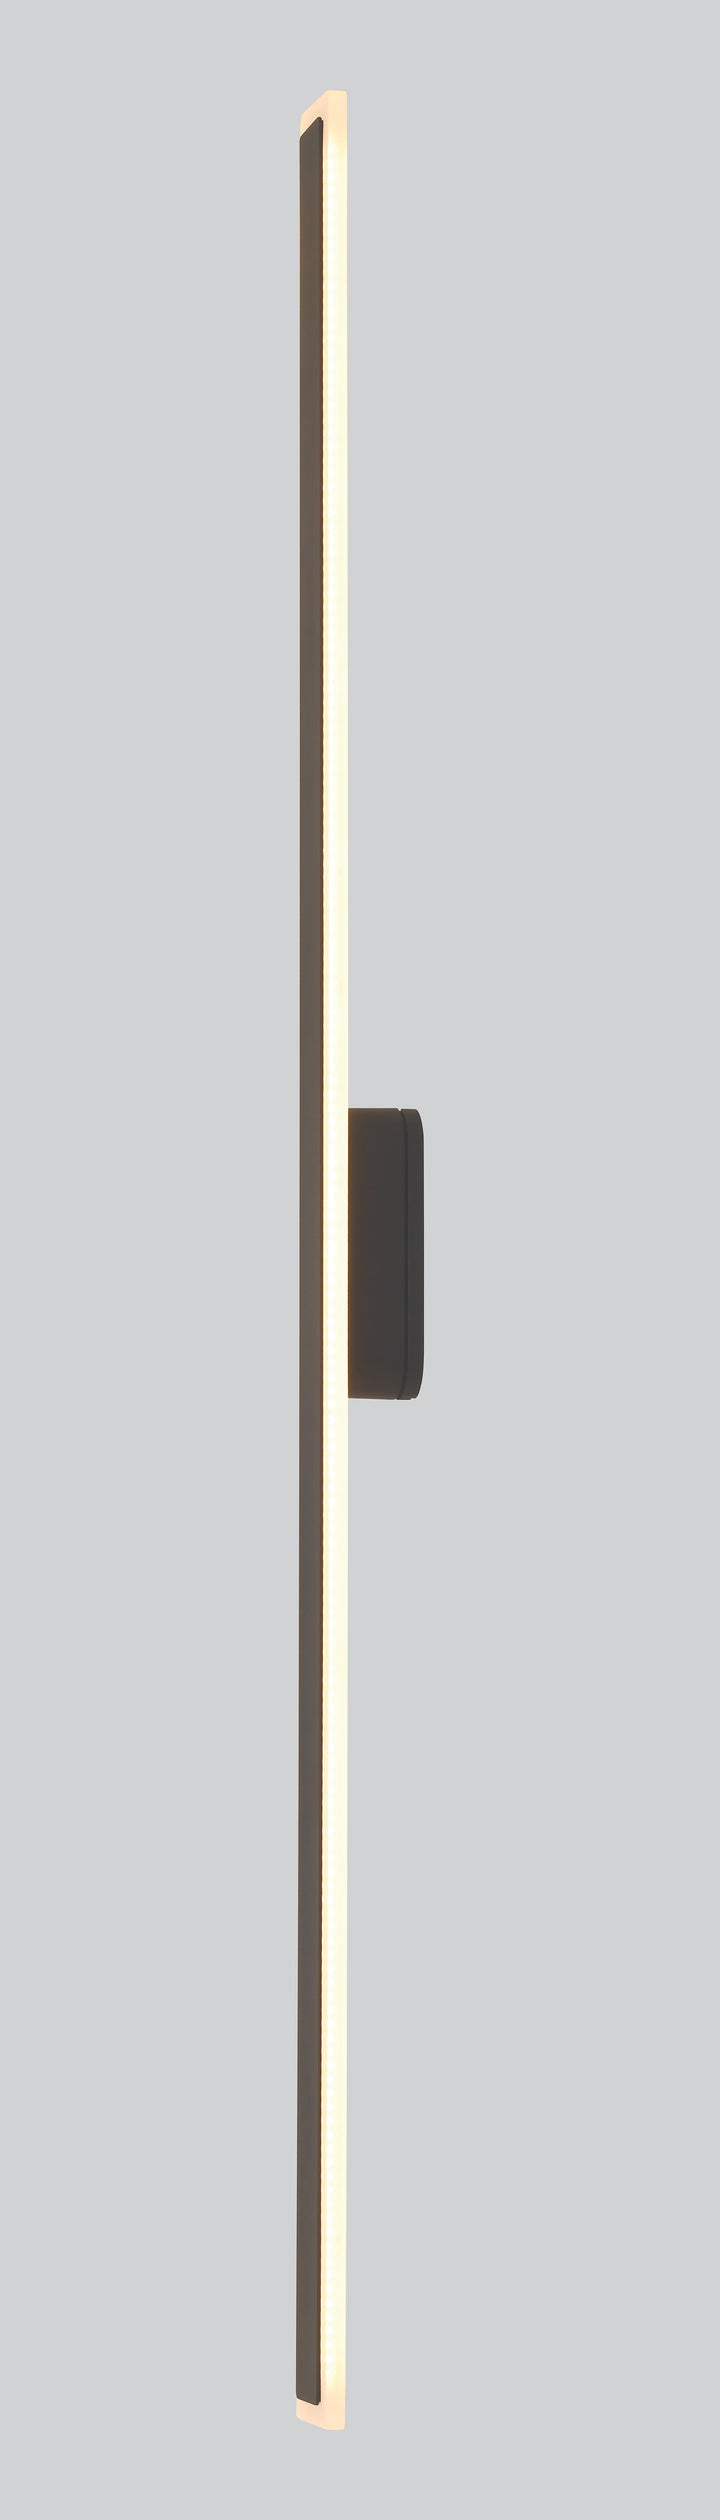 Forster Outdoor Linear Wall Light Large